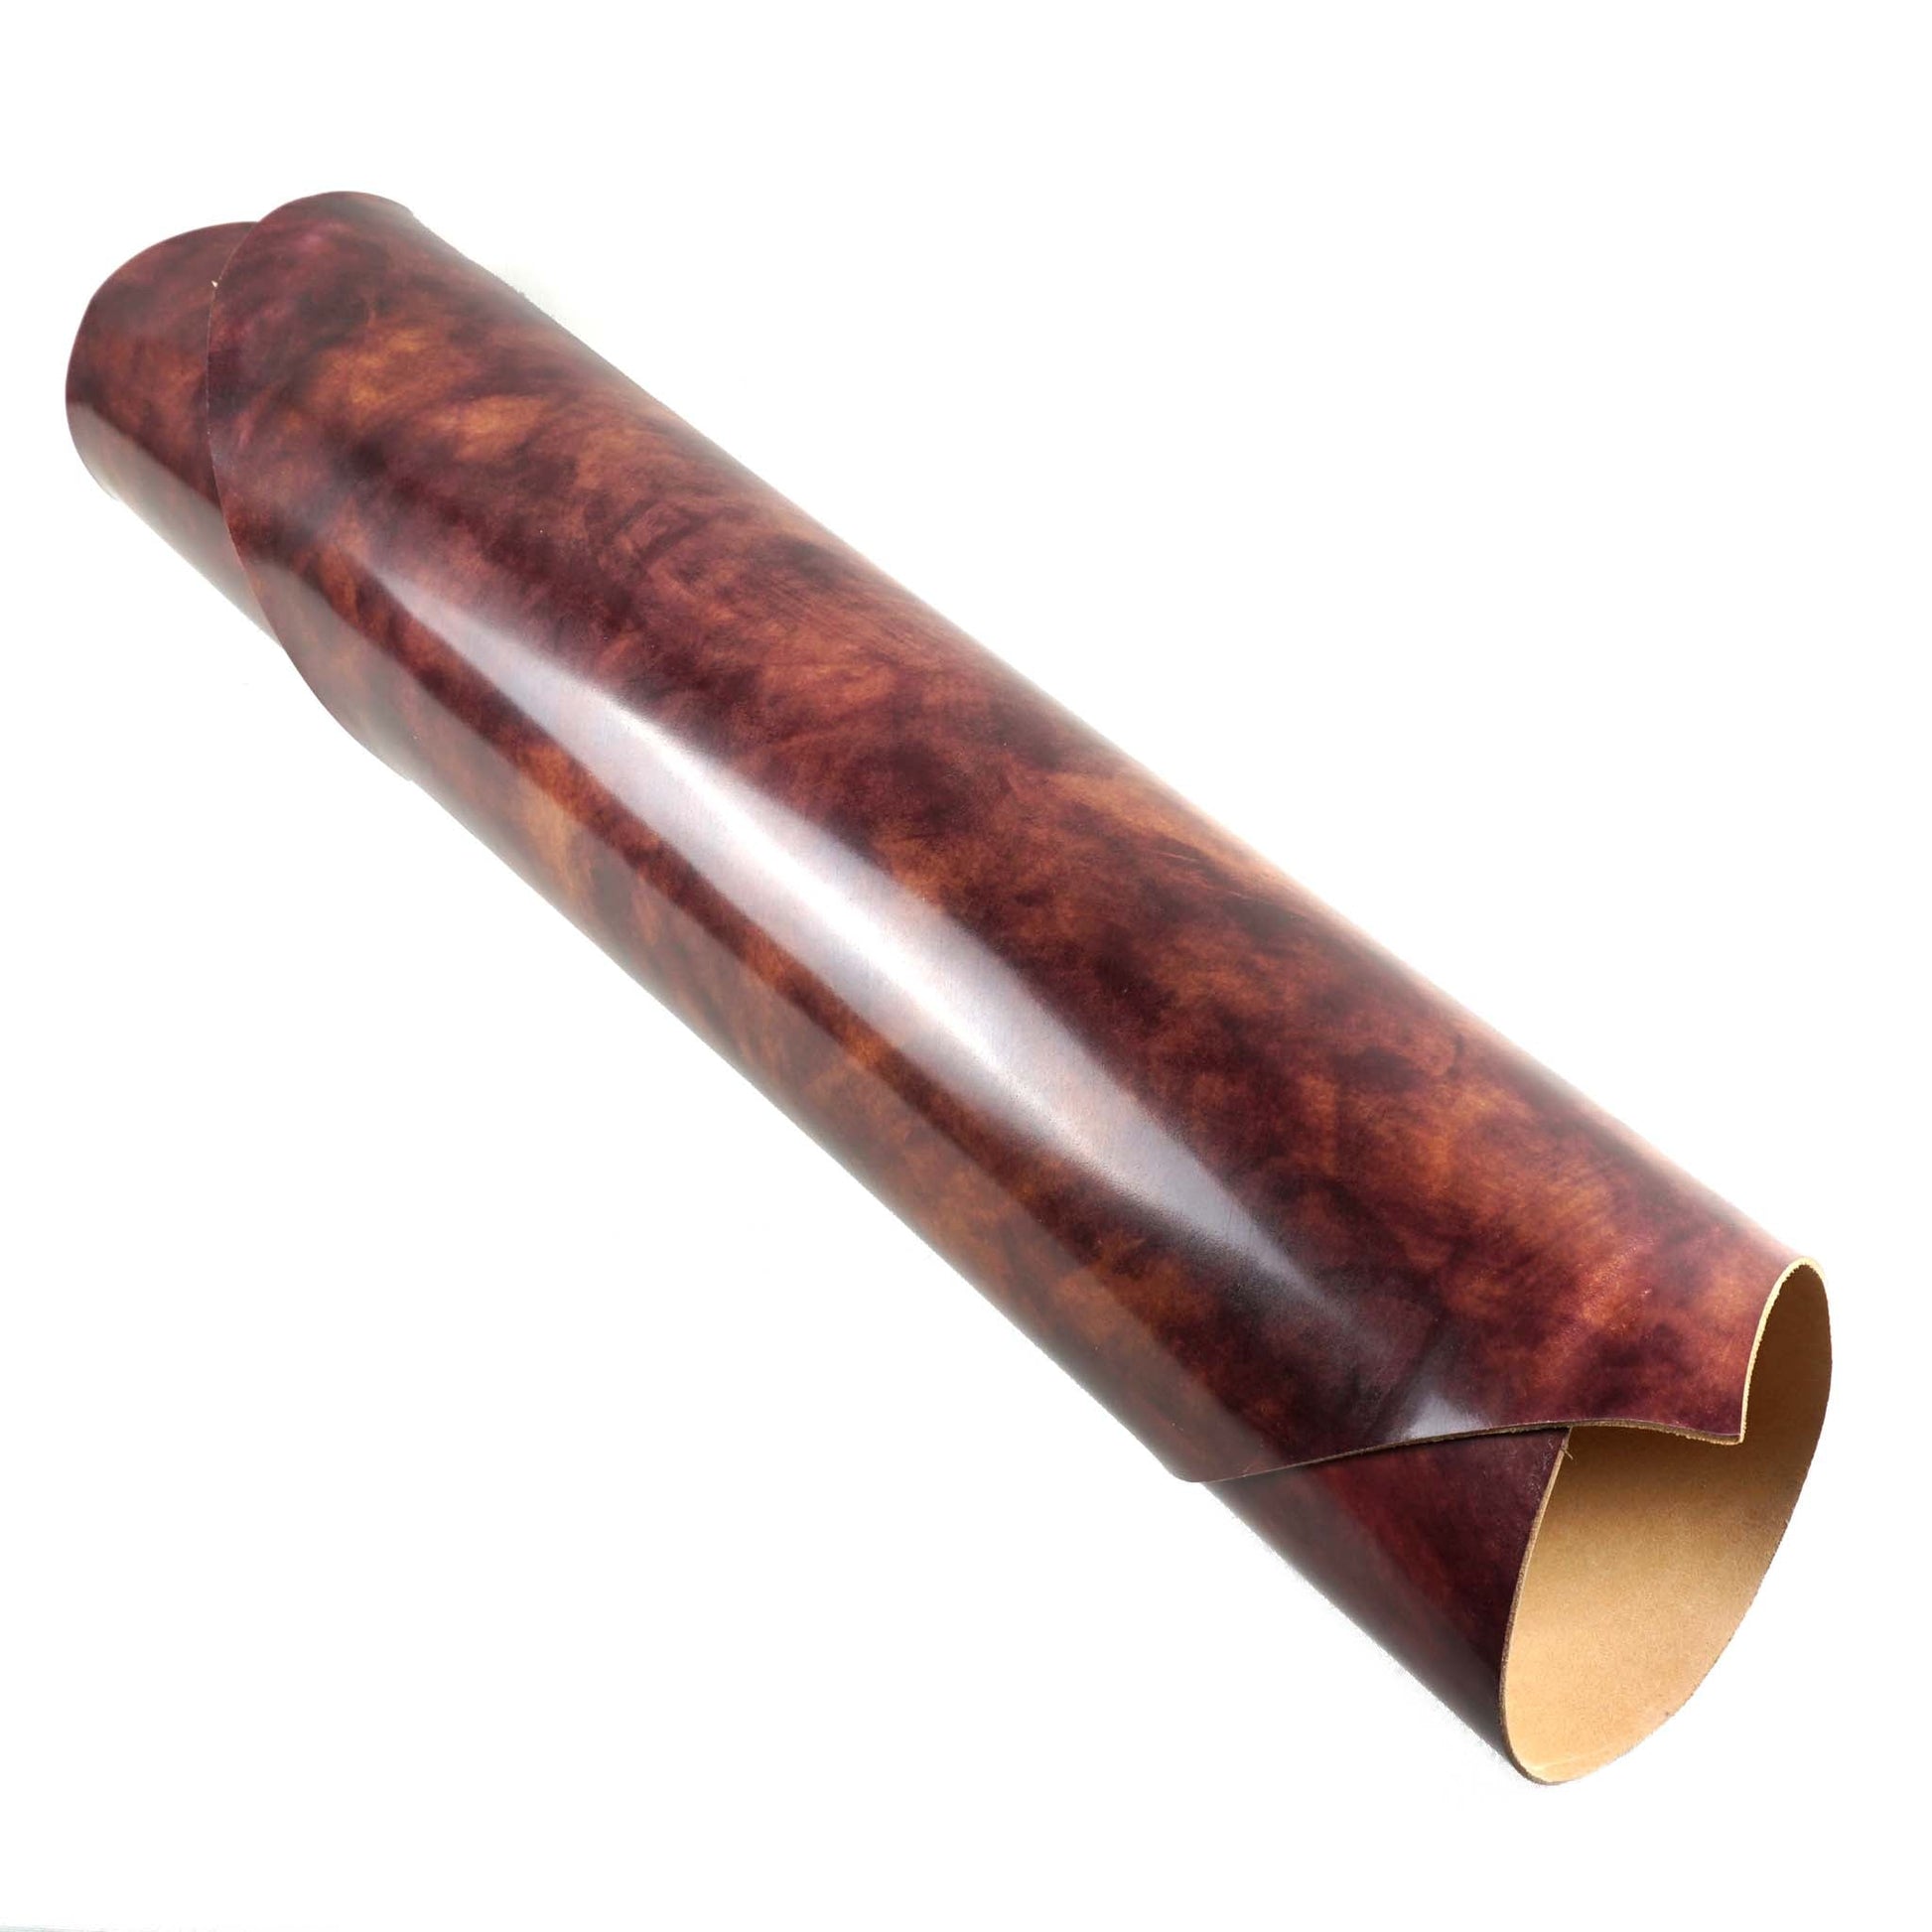 Rocado shell cordovan Museum finish color Burgundy rolled